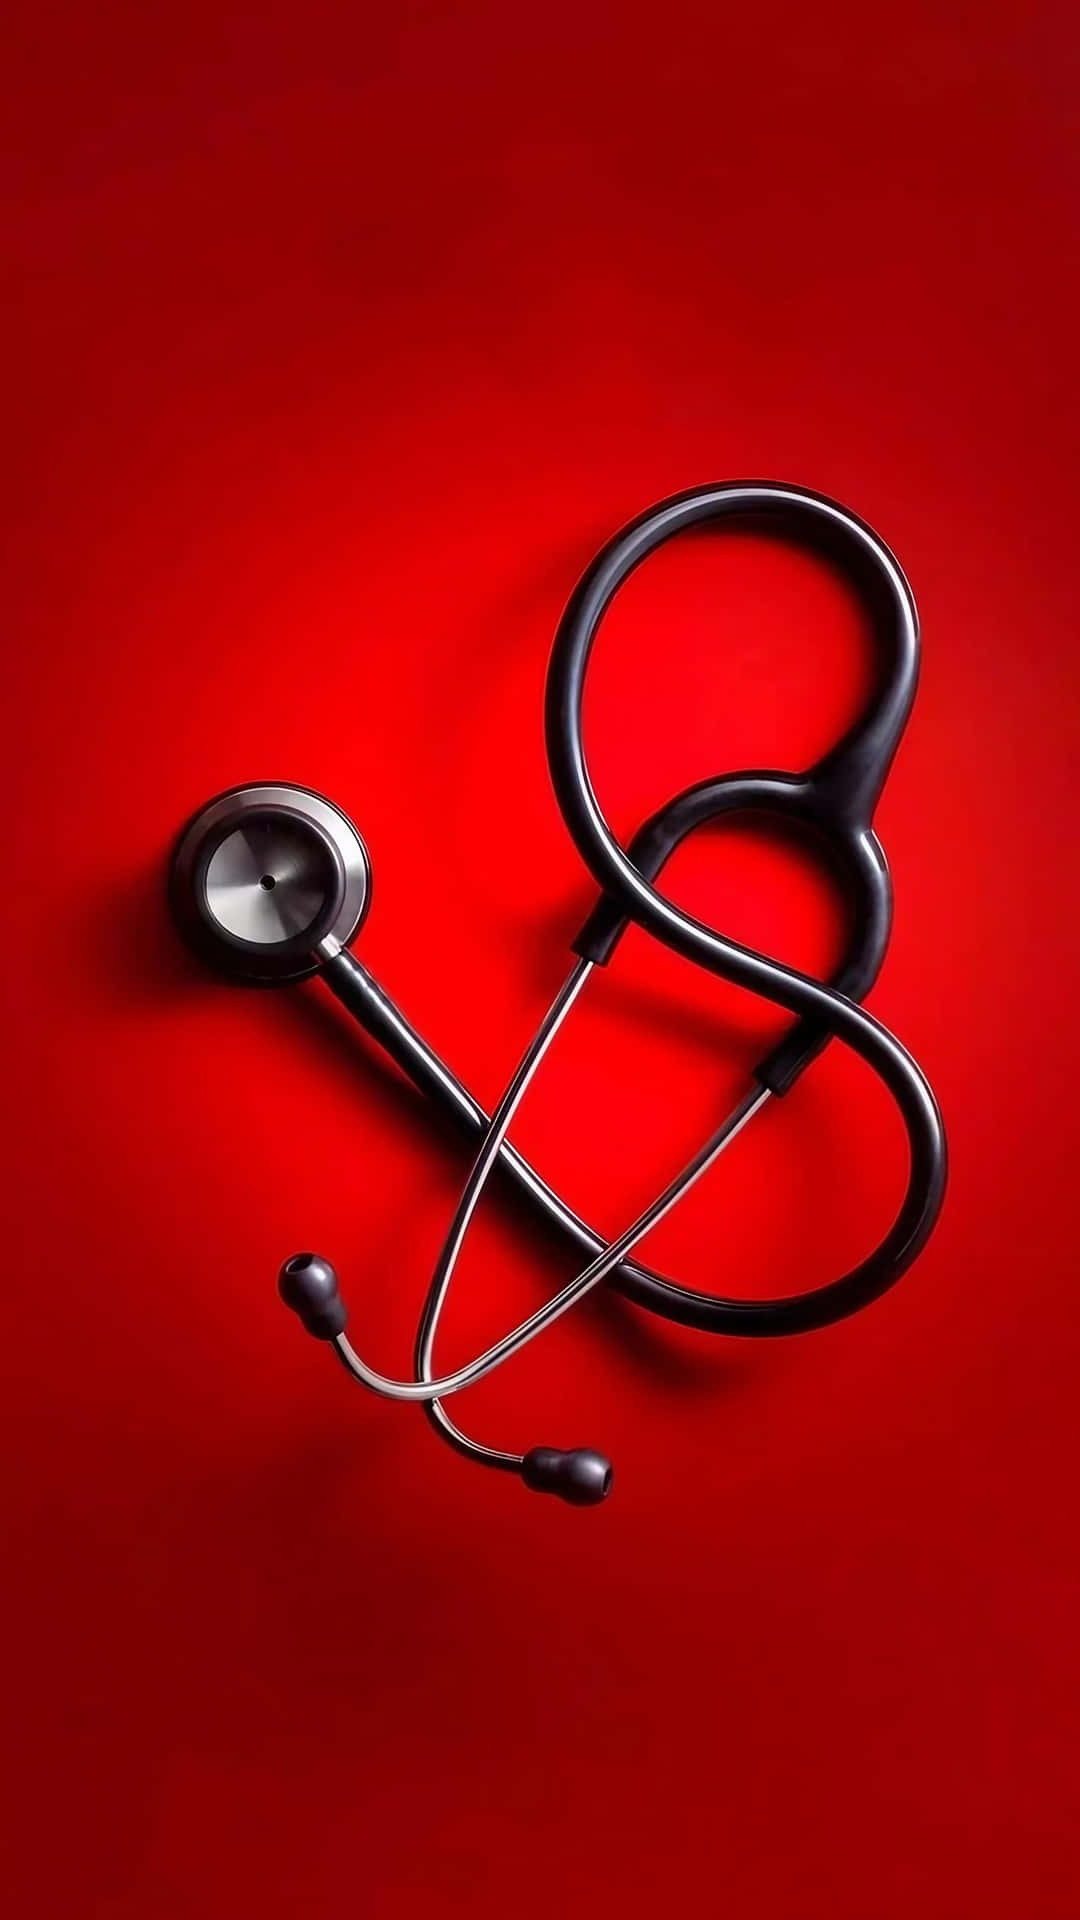 Download Stethoscope 1472 X 2617 Background | Wallpapers.com